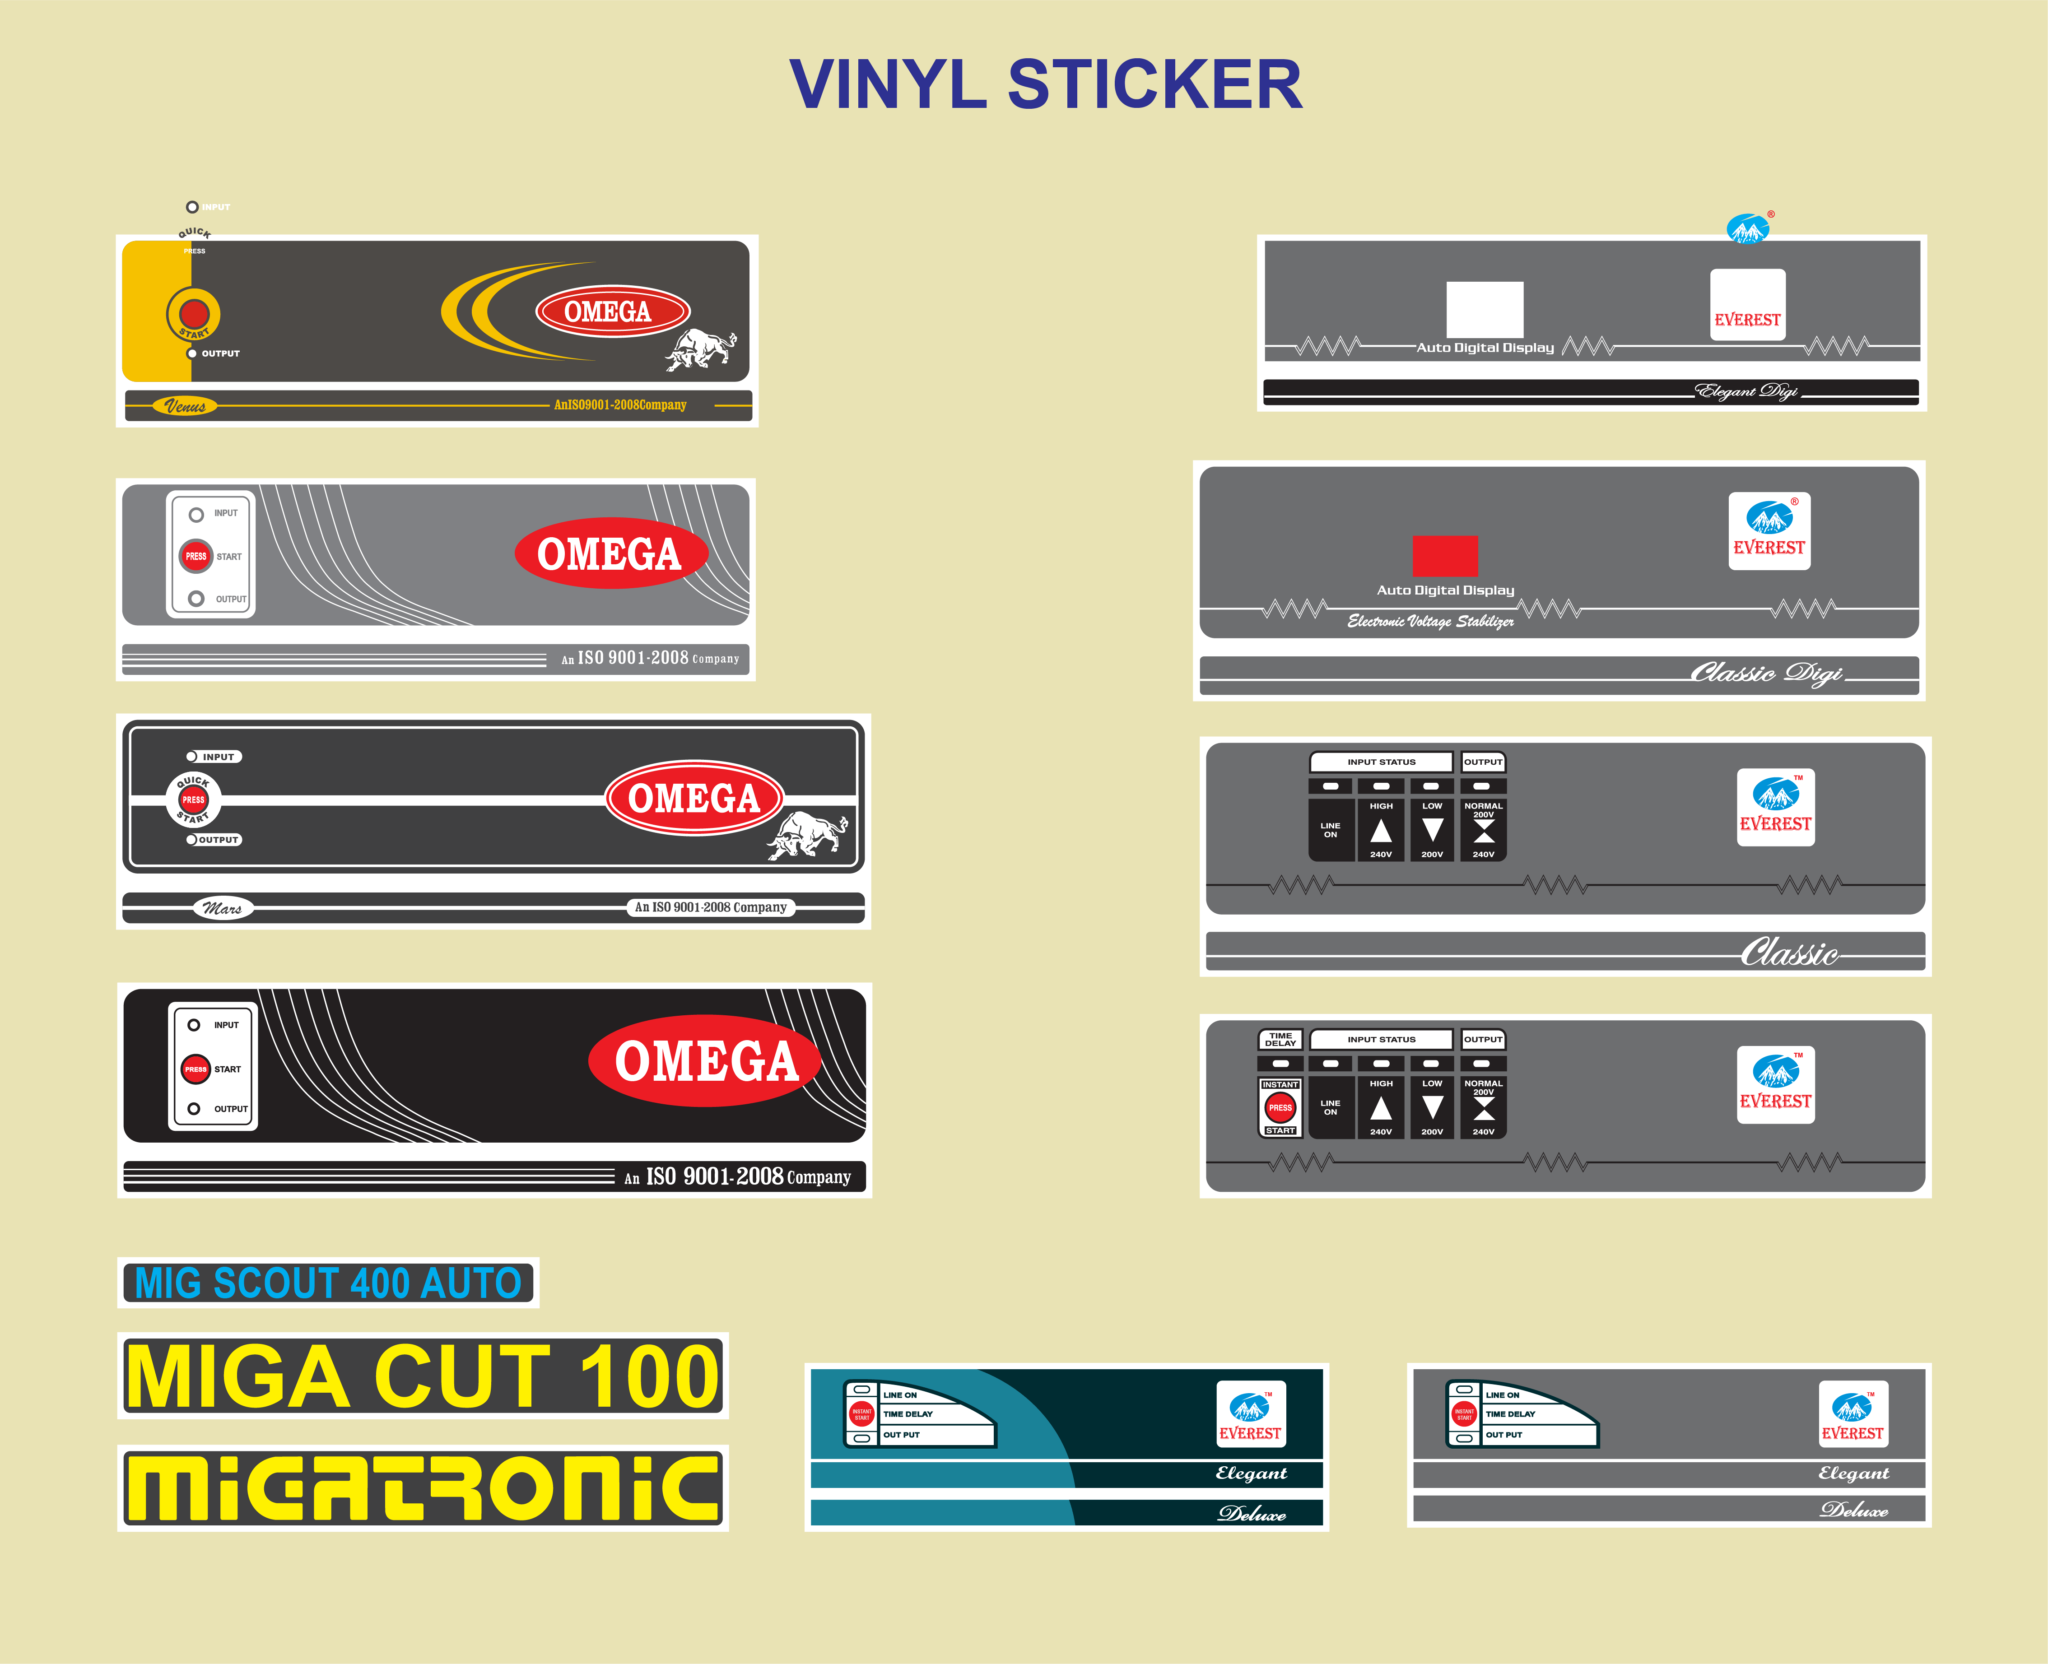 A selection of vinyl sticker printing designs showcasing various branding elements and control panel interfaces for industrial machinery.